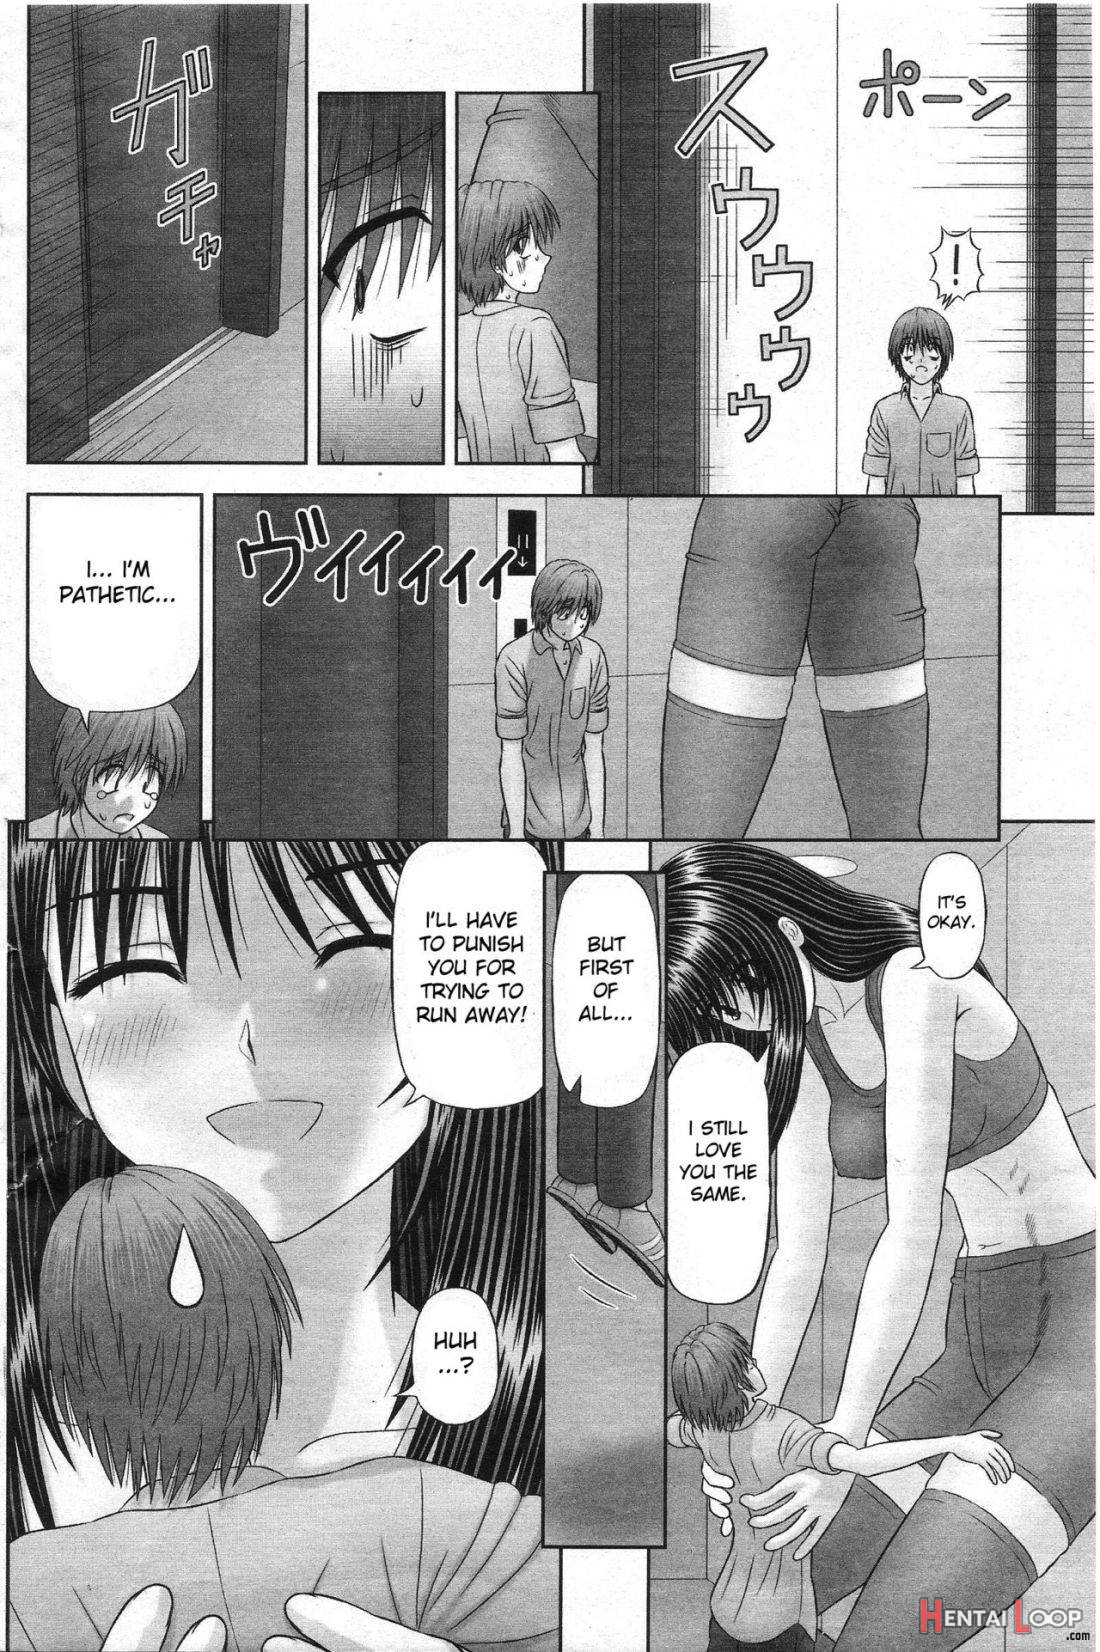 Little Me And Big She page 18